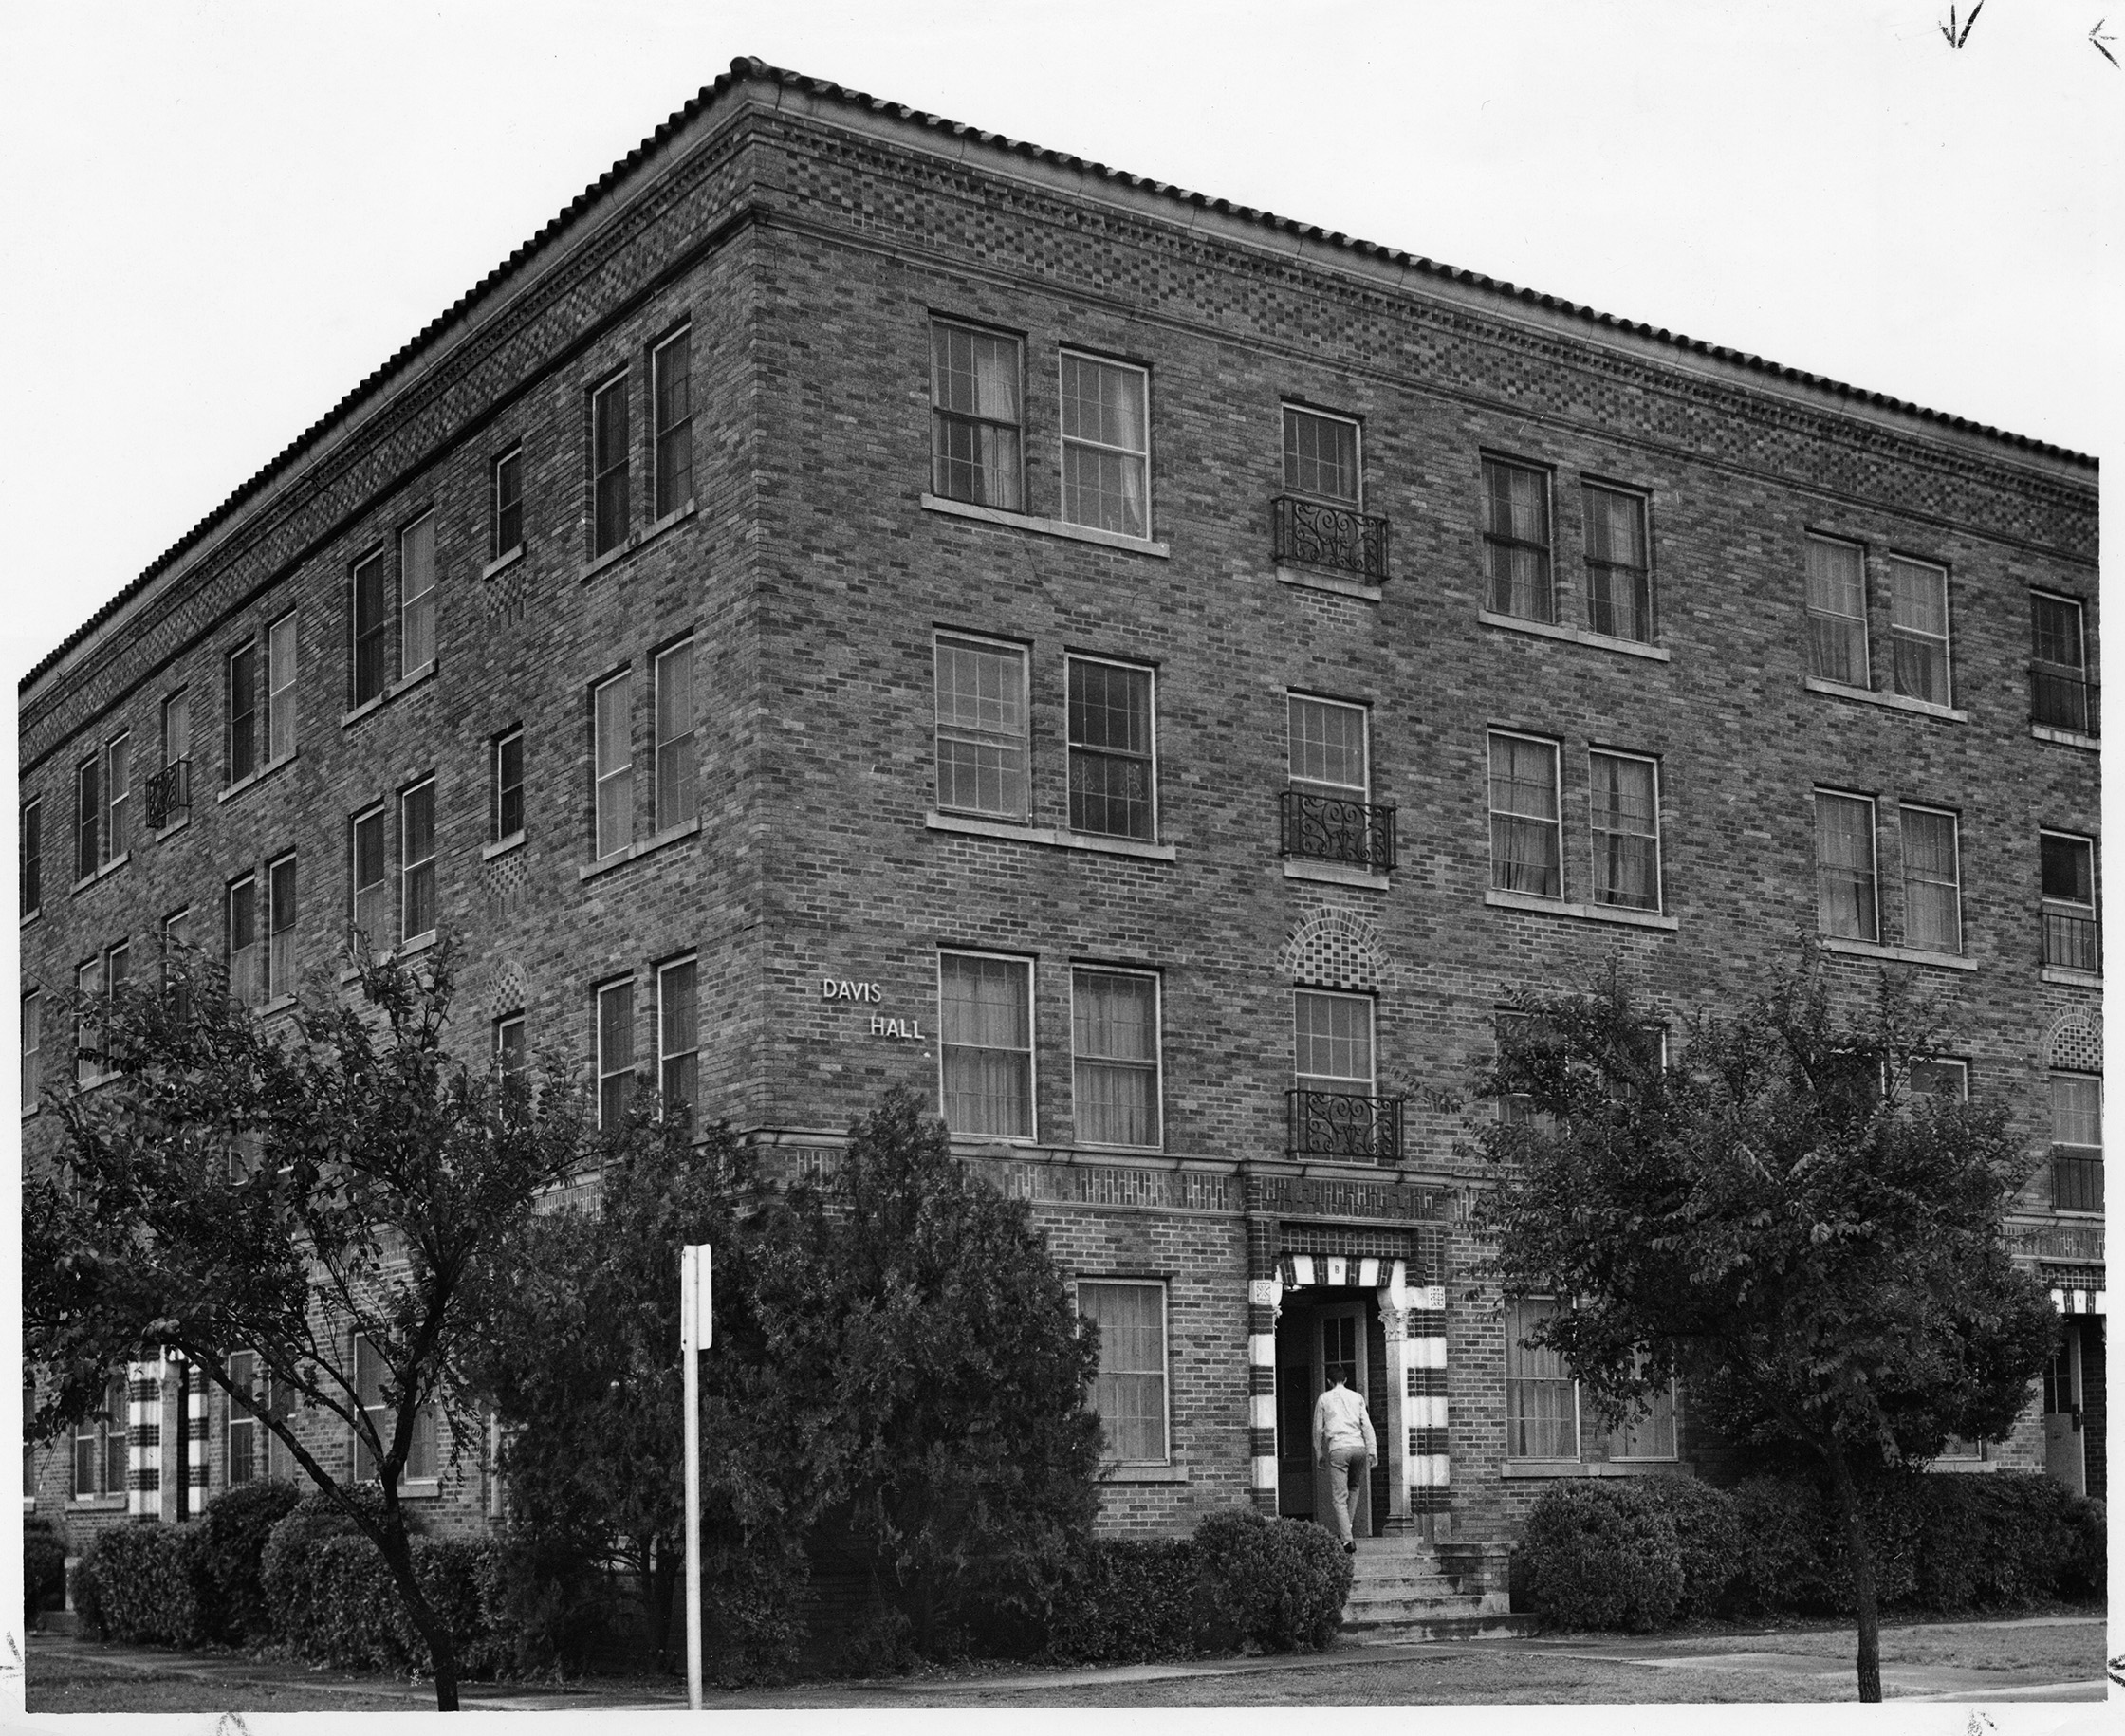 Four-story brick building with trees and shrubs in the foreground. A person is walking into the entrance of the building.